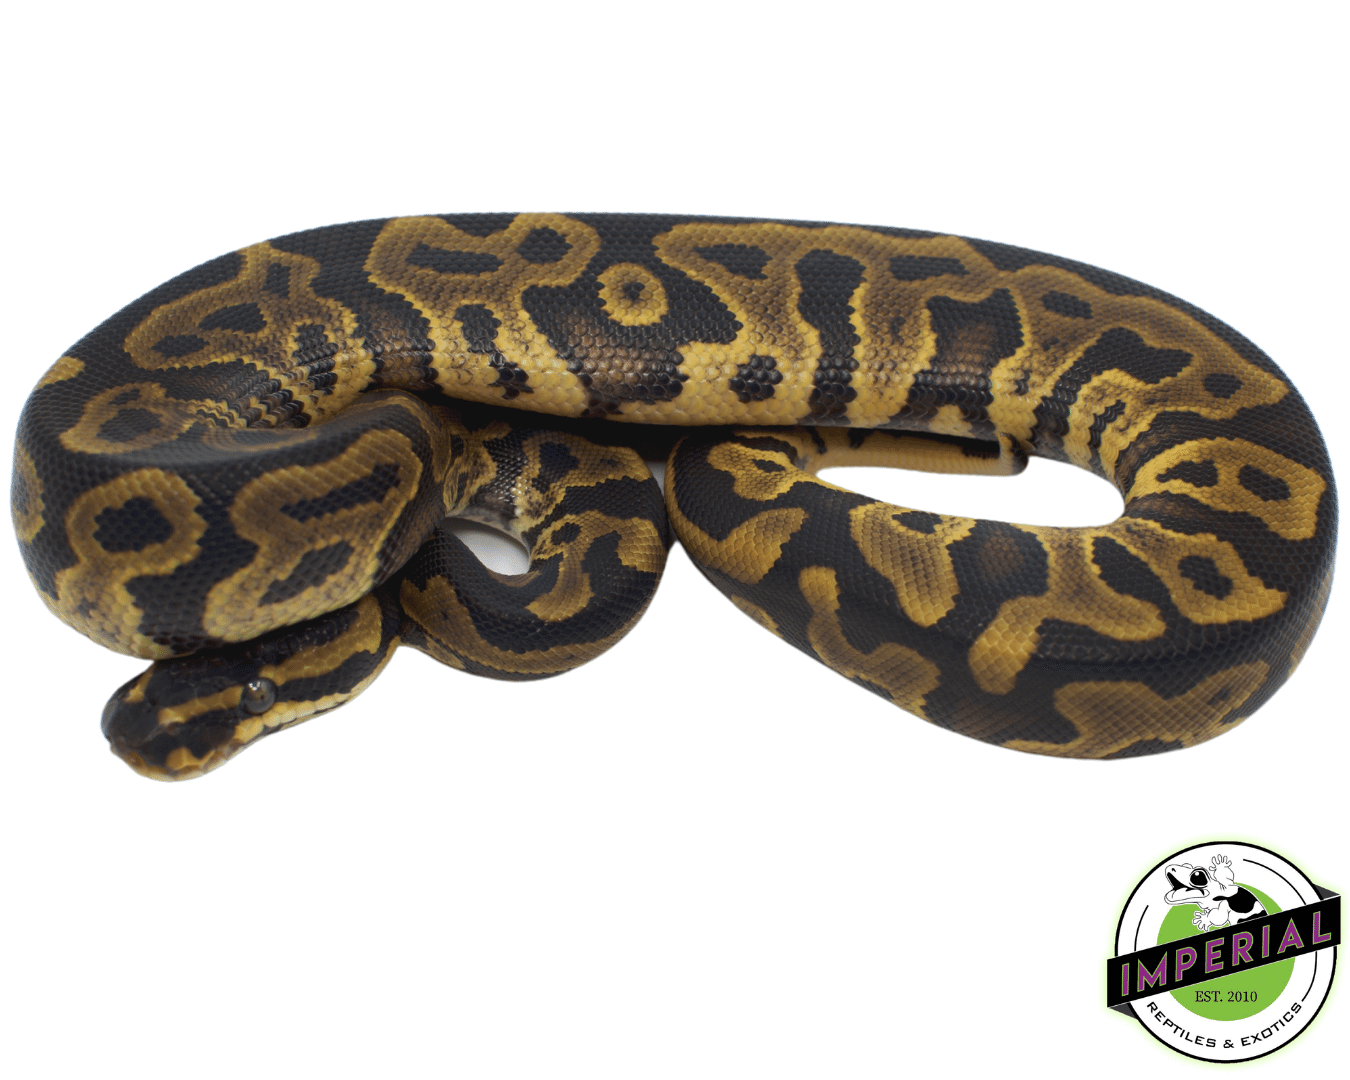 leopard ball python for sale, buy ball pythons online at cheap prices